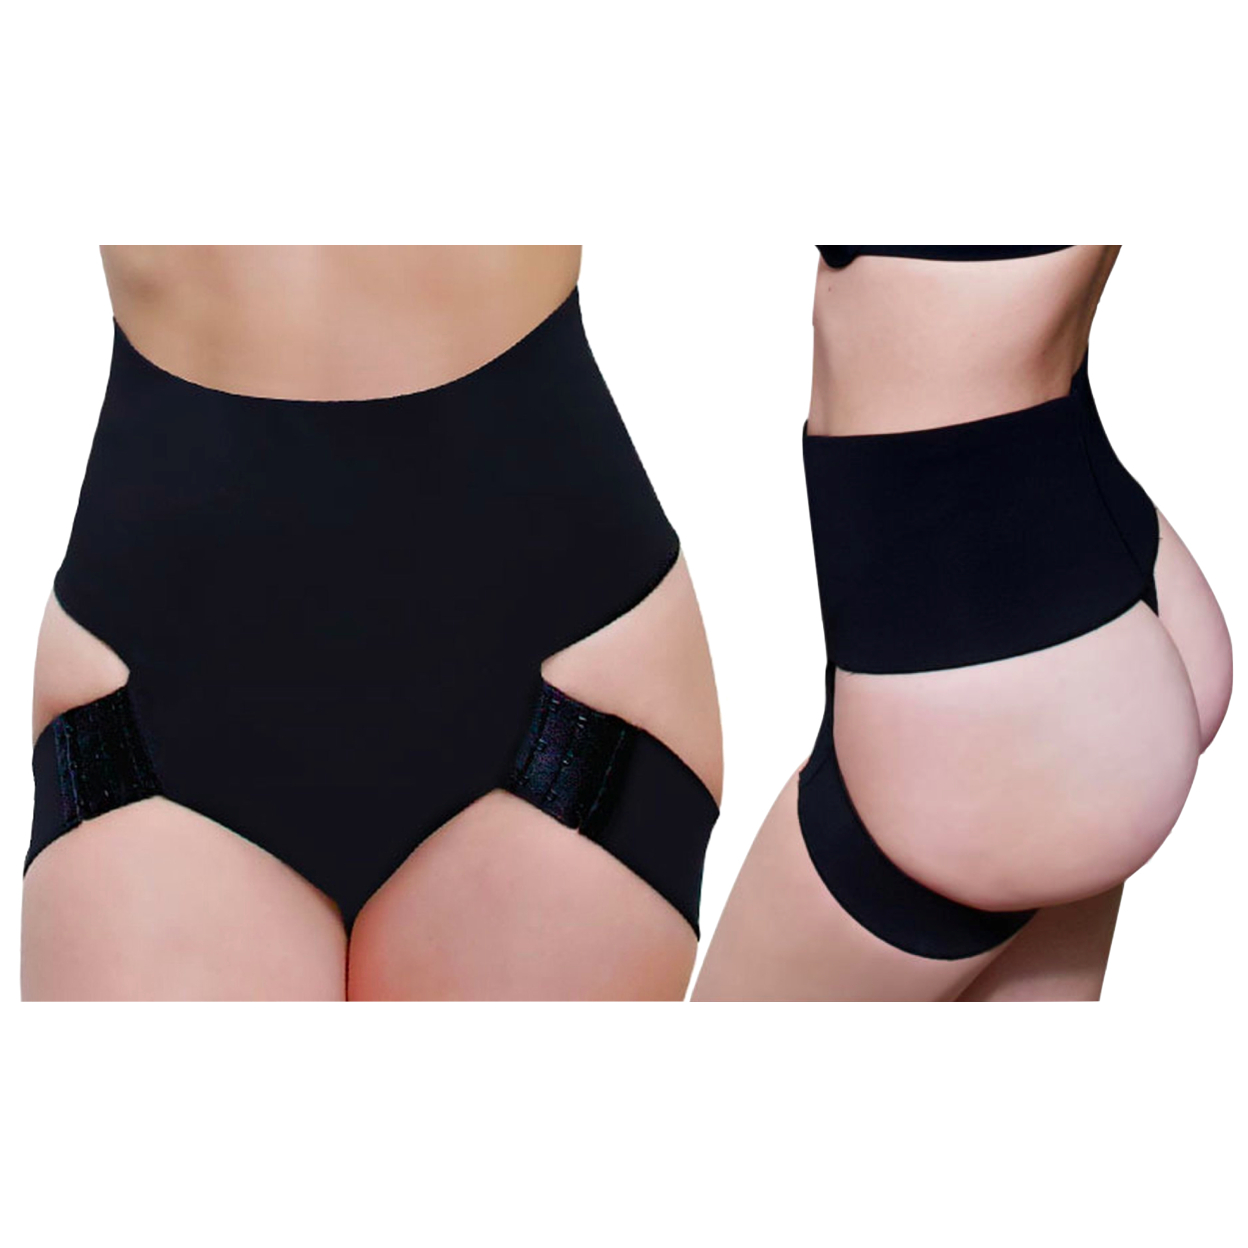 Adjustable Butt Booster Control Shaper In Regular And Plus Sizes - Black, XL